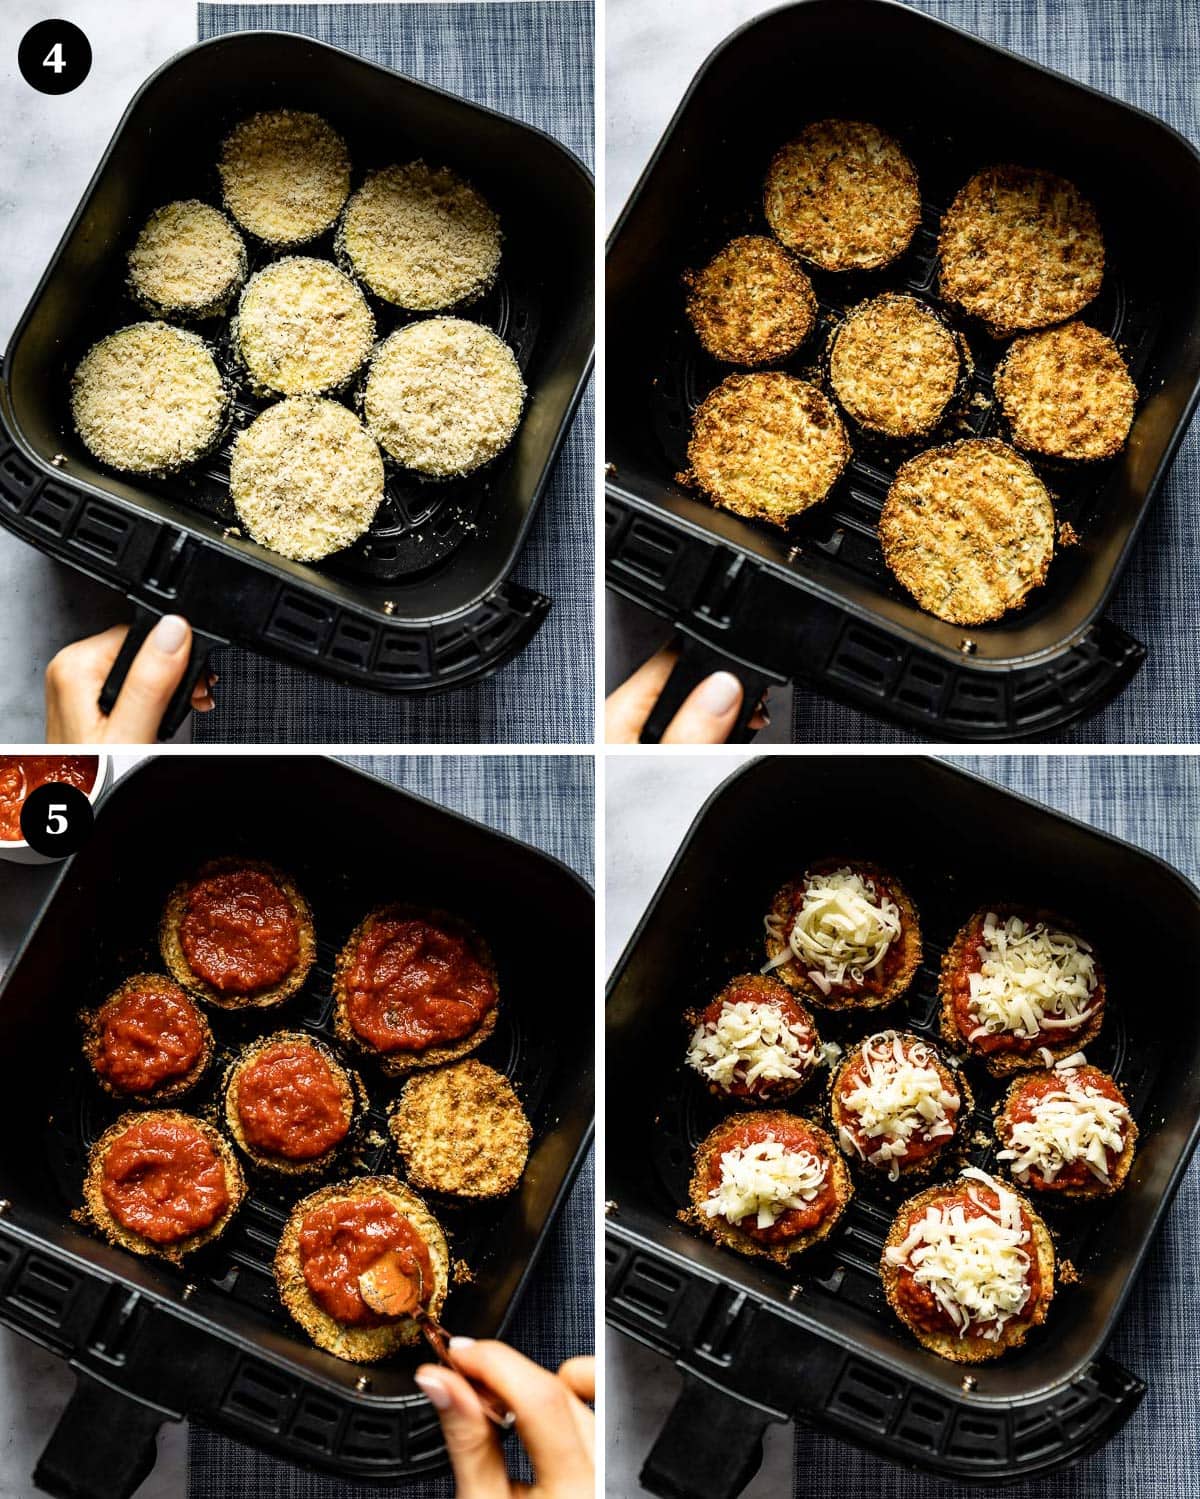 A collage of images showing how to make air fried eggplant parmesan.